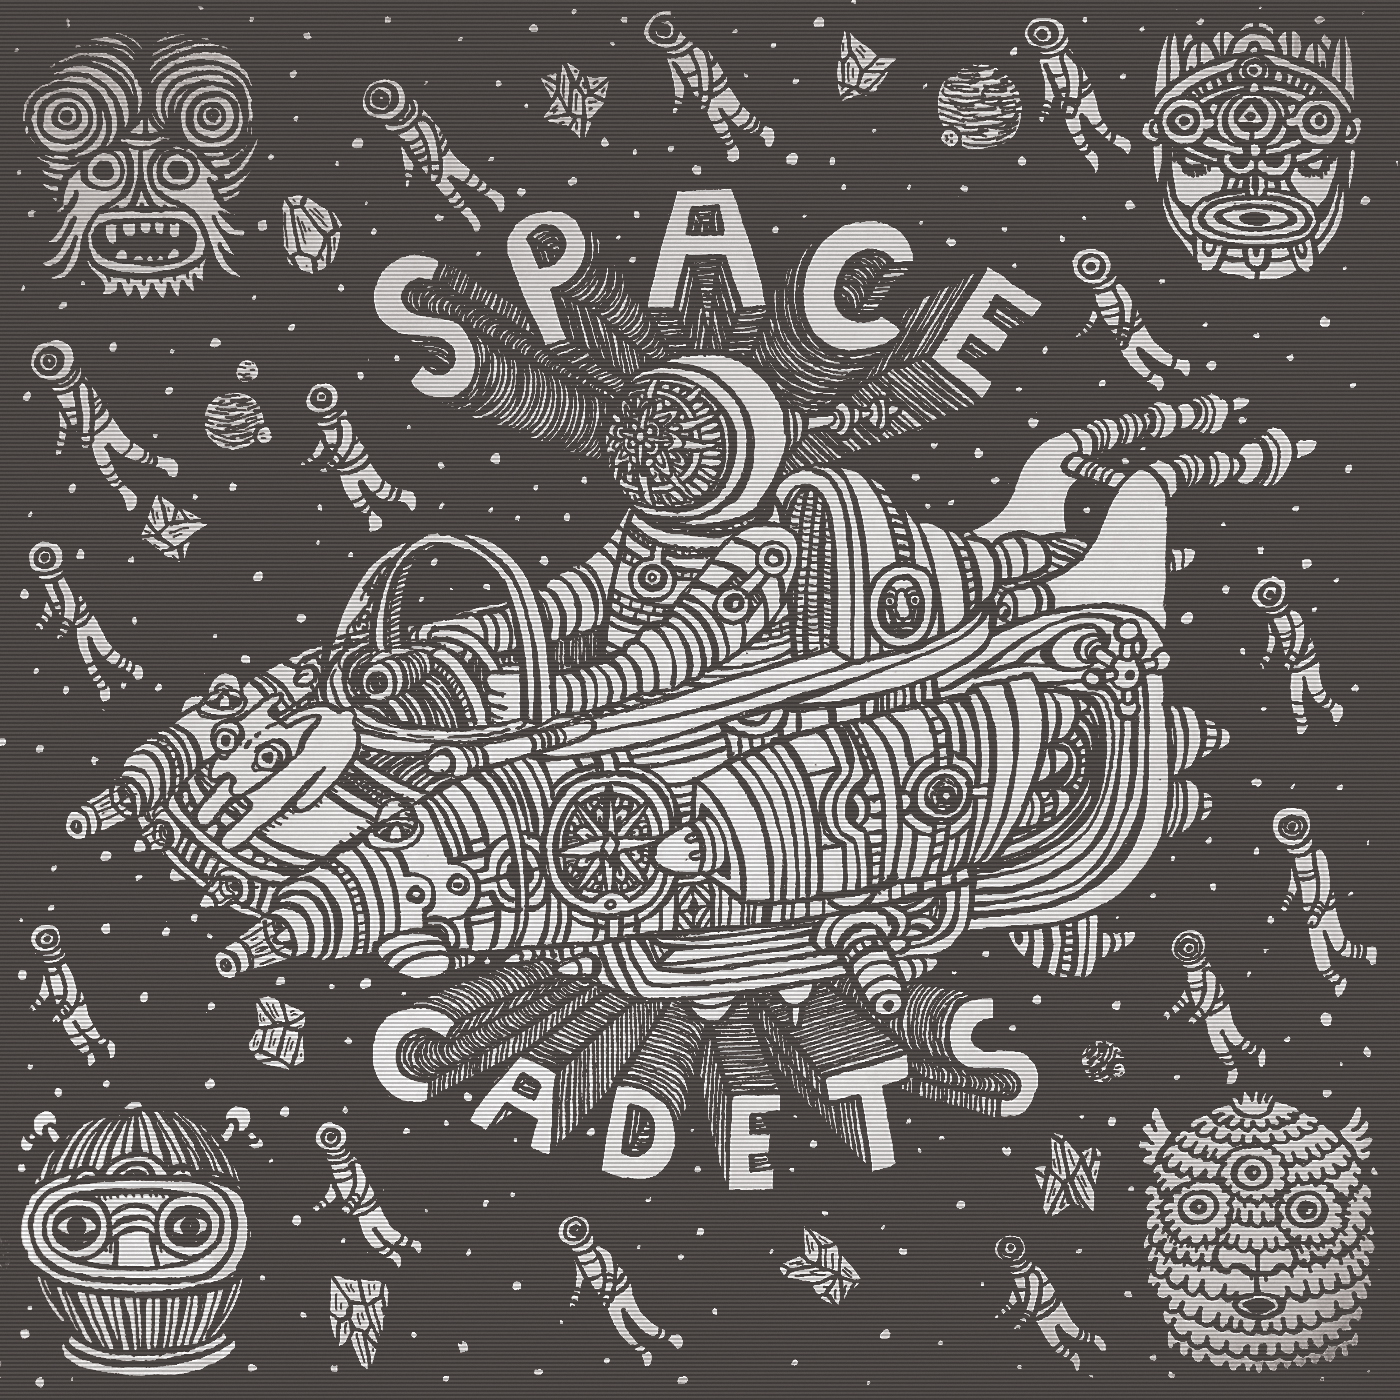 ASC – The Space Cadets Files